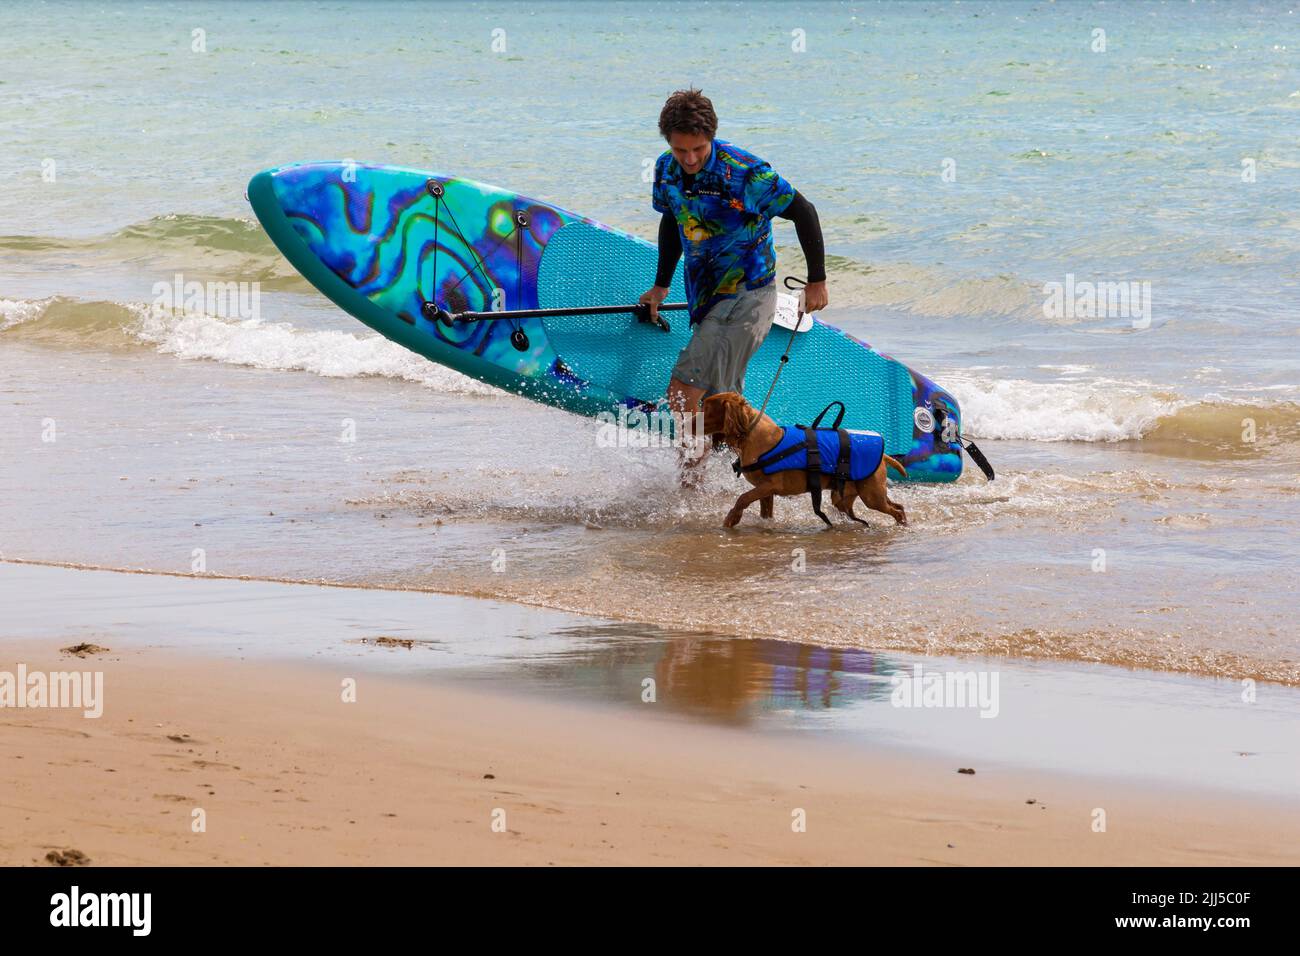 Branksome Dene Chine, Poole, Dorset, UK. 23rd July 2022. The UK Dog Surfing Championships Dog Masters Festival, organised by Shaka Surf, takes place at Branksome Dene Chine beach. Britains only surf contest for canines, now in its fourth year, is bigger than ever, with 30 canine competitors registered for a fast paced doggy paddleboard race, as well as dog owner lookalike fancy dress competition, Mutts Market, Paw Inn beach bar, dog show, food and more, with live music into the evening. Credit: Carolyn Jenkins/Alamy Live News Stock Photo